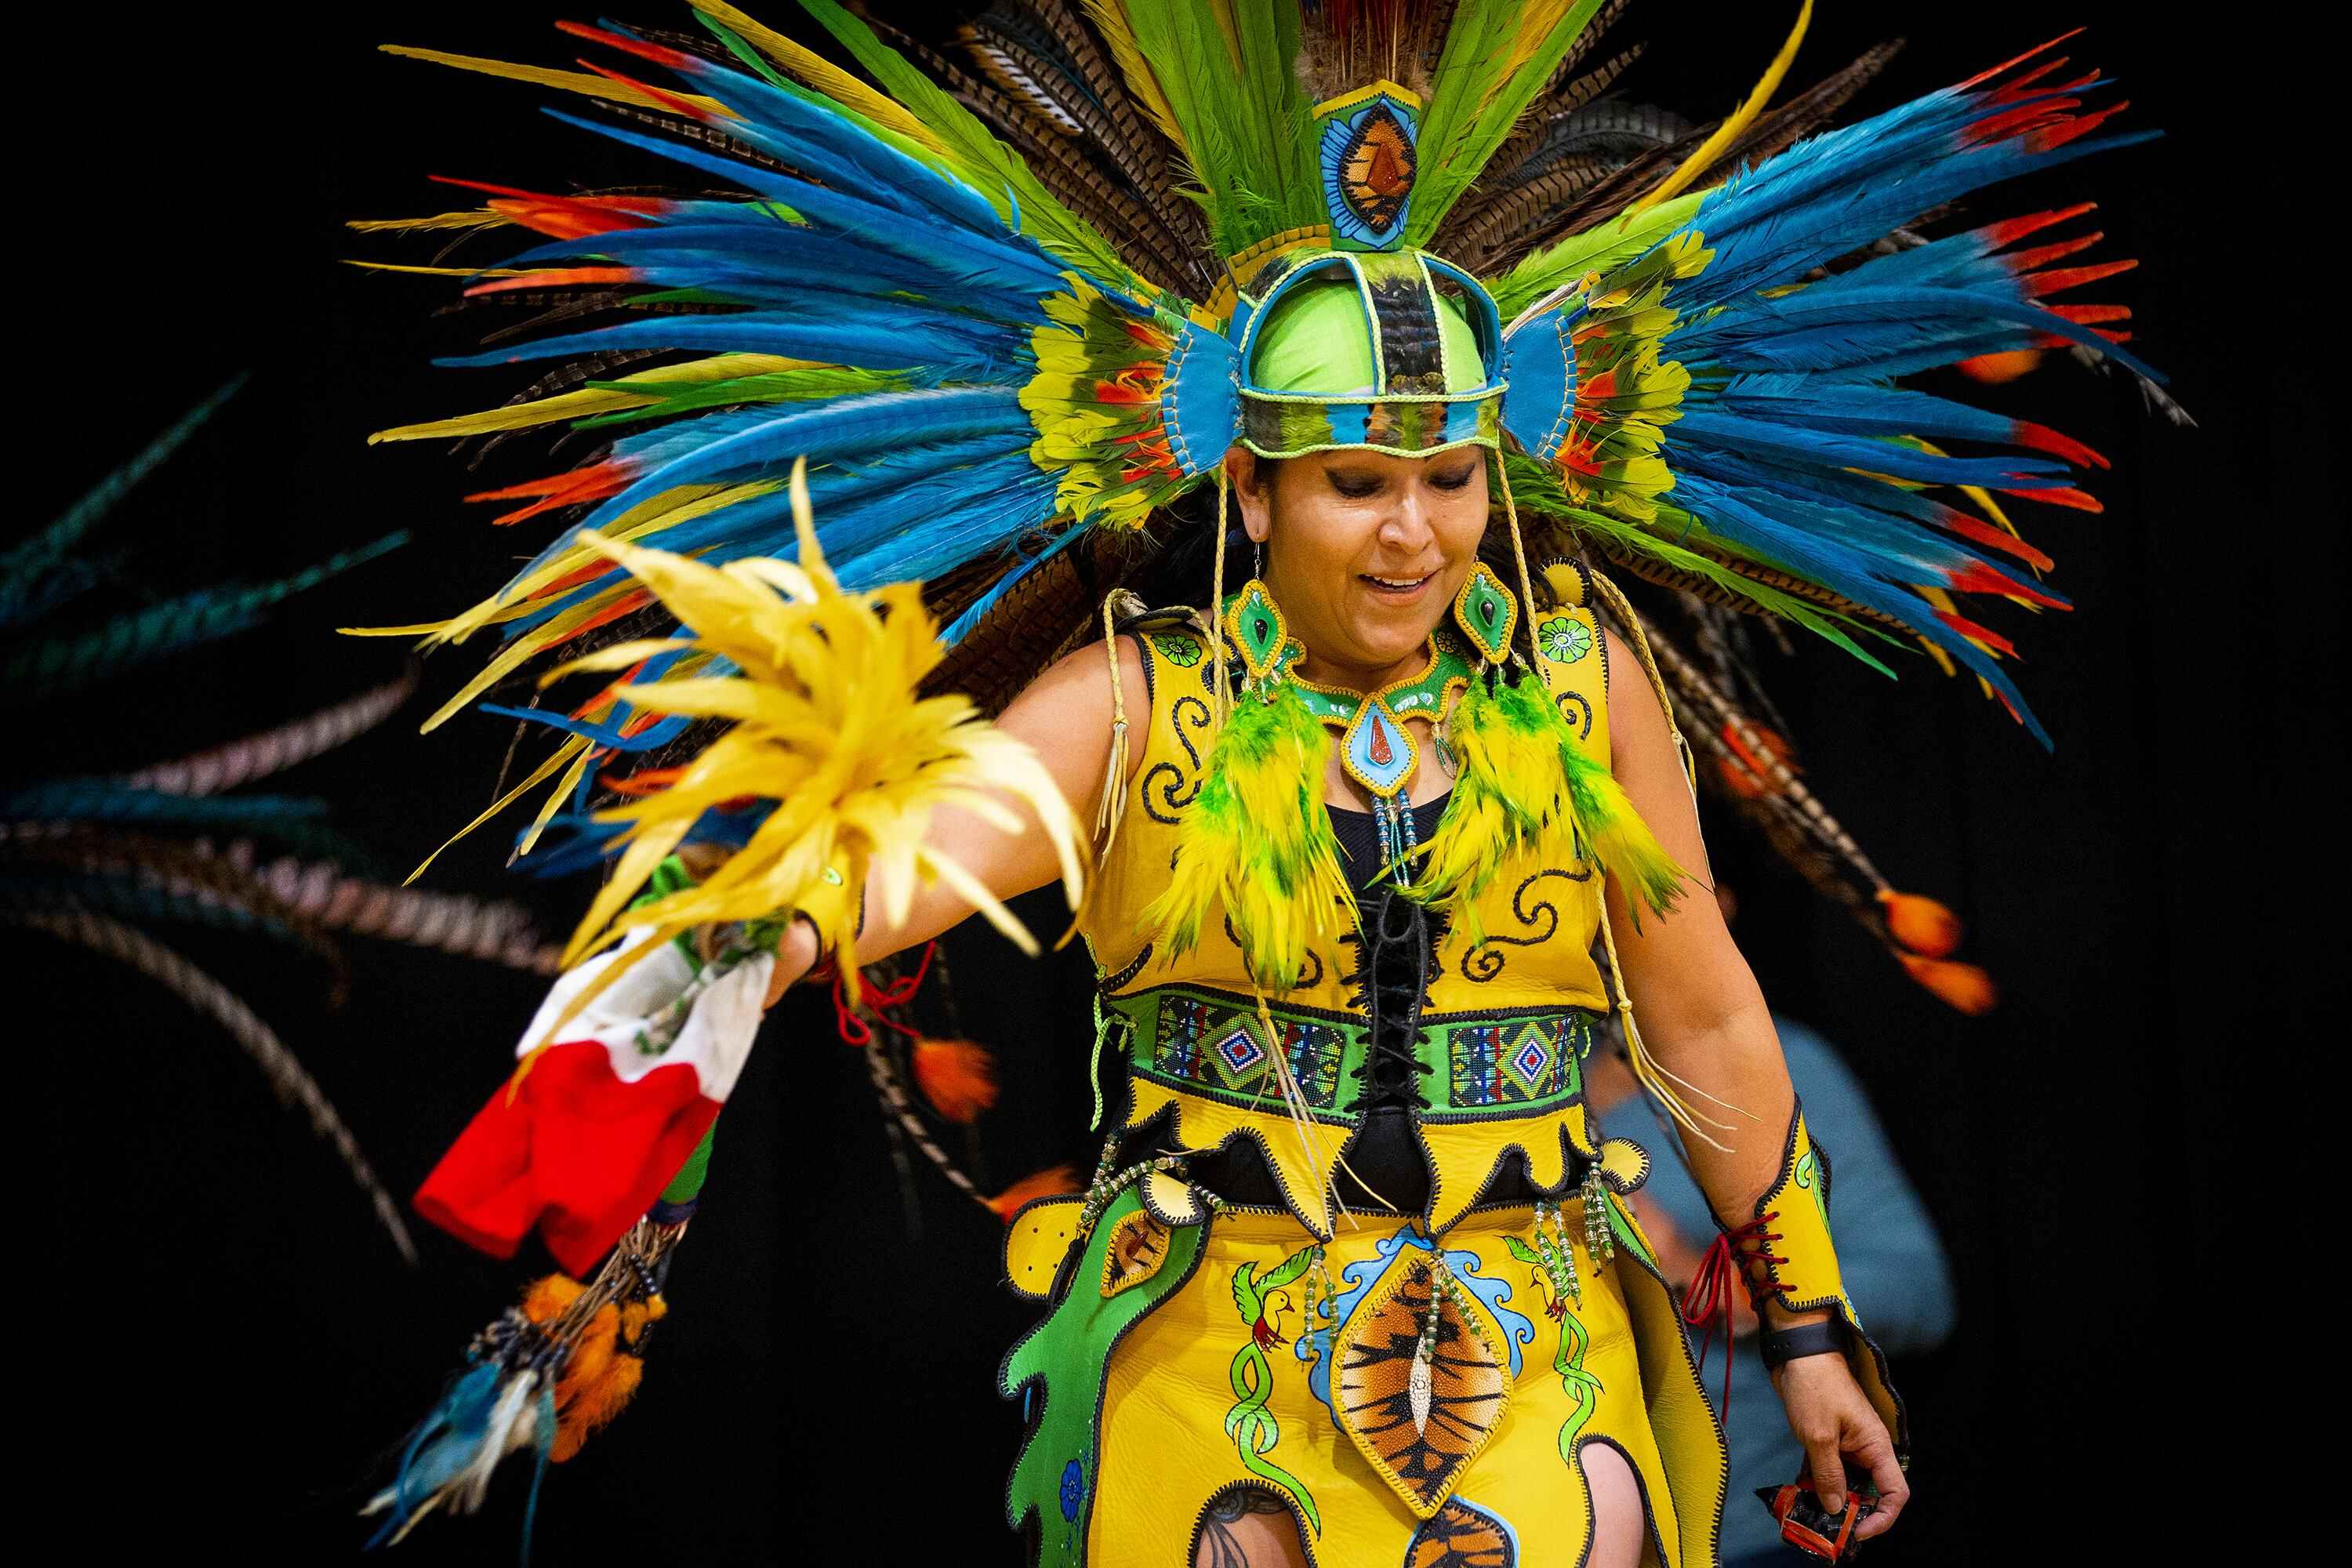 Native American woman doing a traditional dance